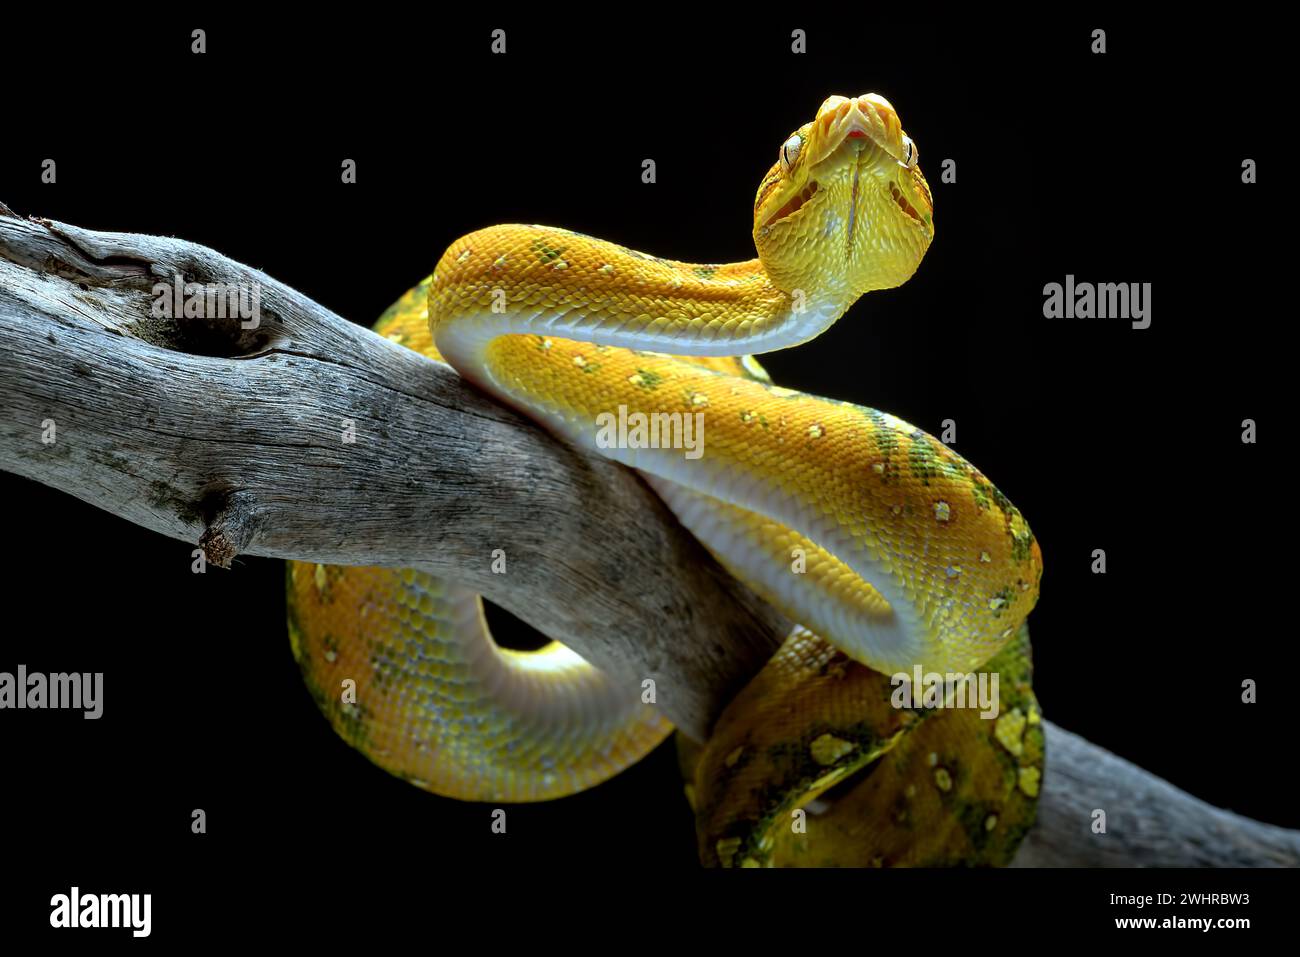 Green tree phyton coiled around a tree branch Stock Photo